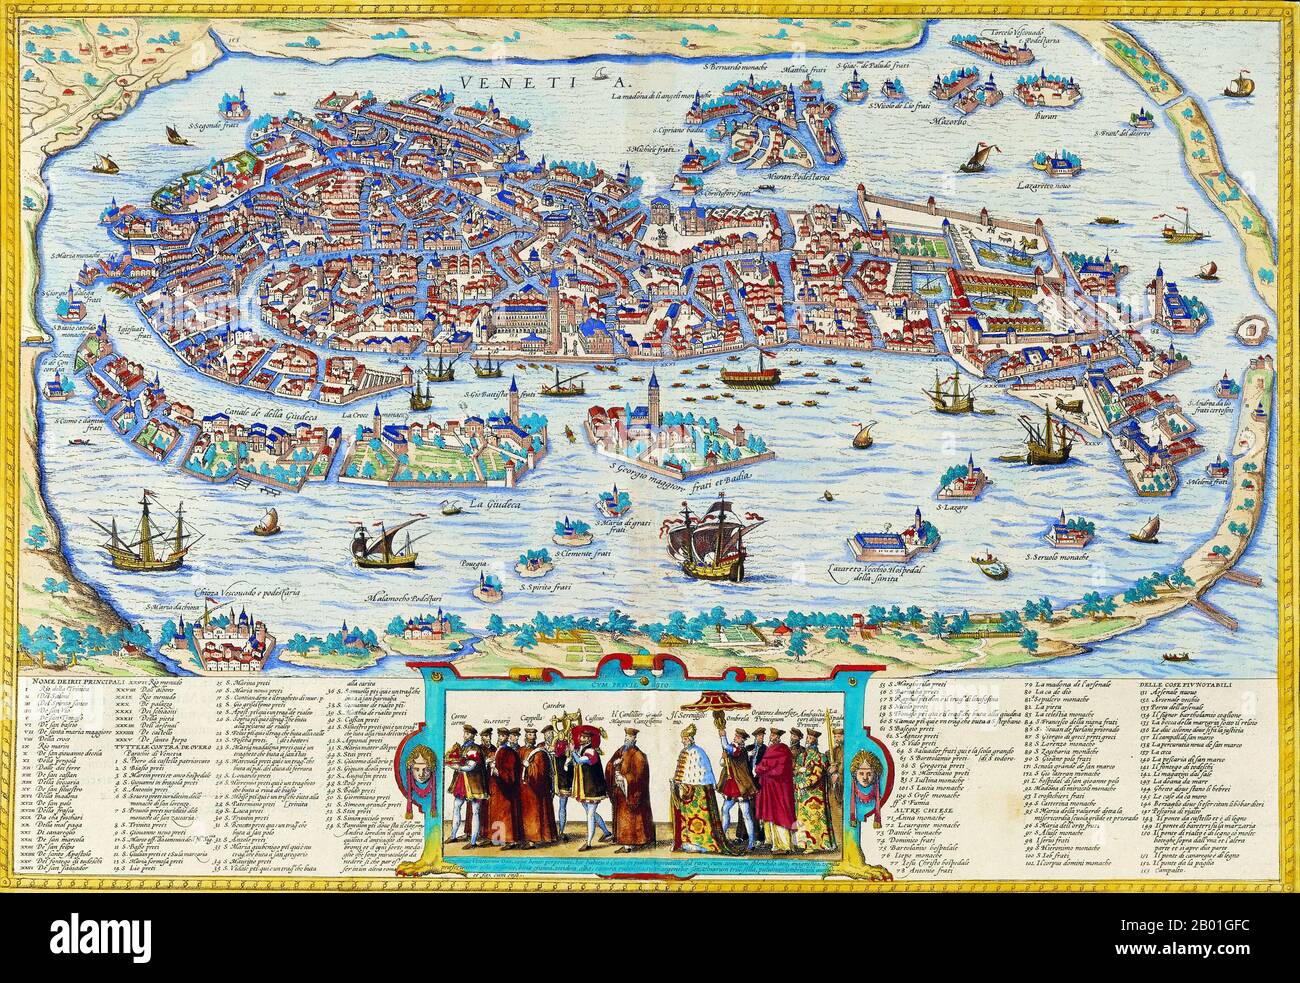 Italy/Venice/Germany: View and Plan of Venice. Map by Georg Braun (1541-1622) and Frans Hogenberg (1535-1590), Germany, 1572.  The Republic of Venice (Italian: Repubblica di Venezia, Venetian: Repùblica Vèneta or Repùblica de Venesia) or Venetian Republic was a state originating from the city of Venice in Northeastern Italy. It existed for over a millennium, from the late 7th century until 1797.  It was formally known as the Most Serene Republic of Venice (Italian: Serenissima Repubblica di Venezia, Venetian: Serenìsima Repùblica Vèneta) and is often referred to as La Serenissima. Stock Photo